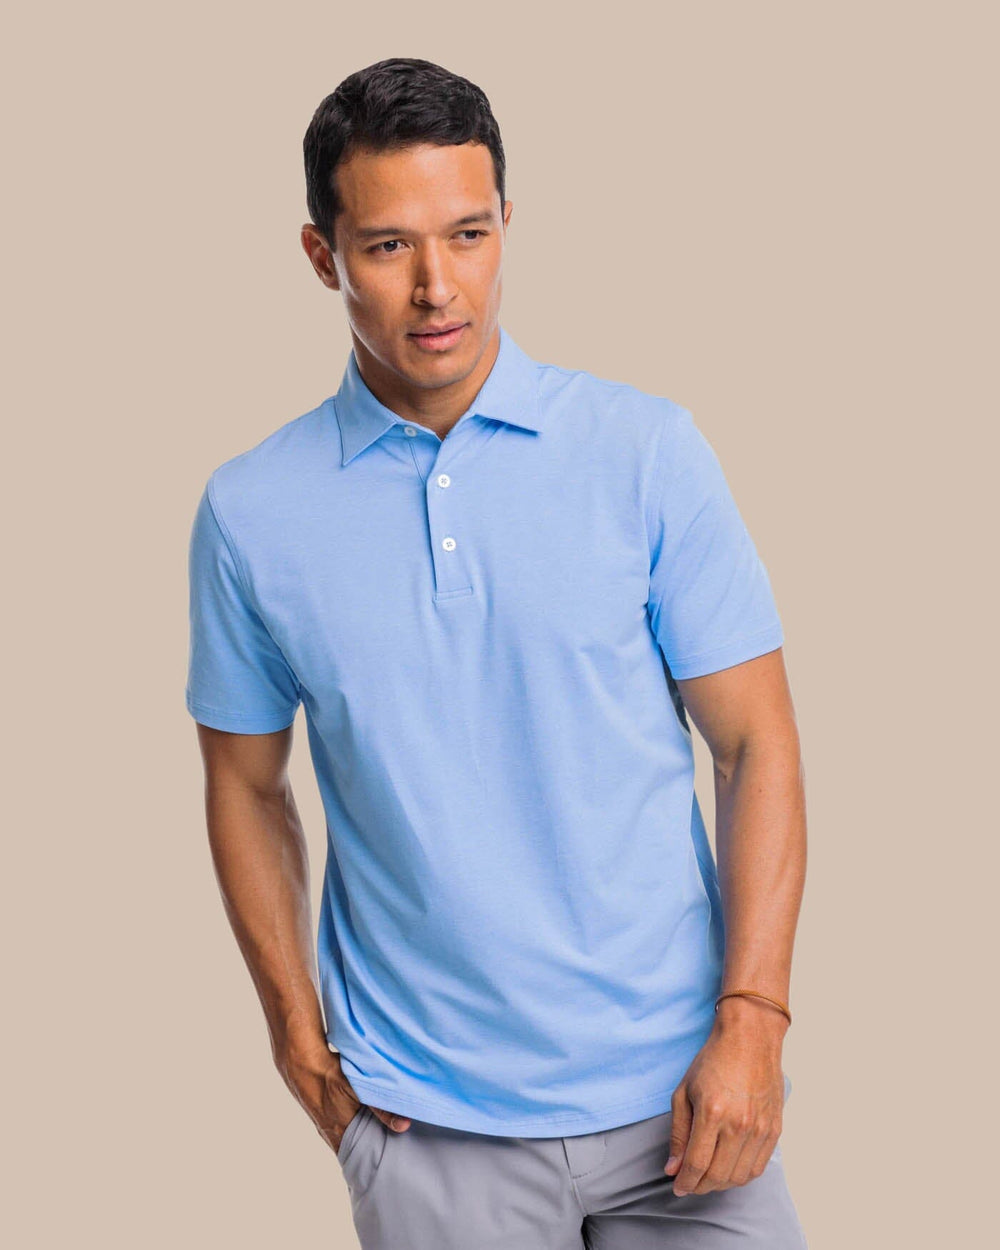 The front view of the brrr°®-eeze Heather Performance Polo Shirt by Southern Tide - Heather Ocean Channel